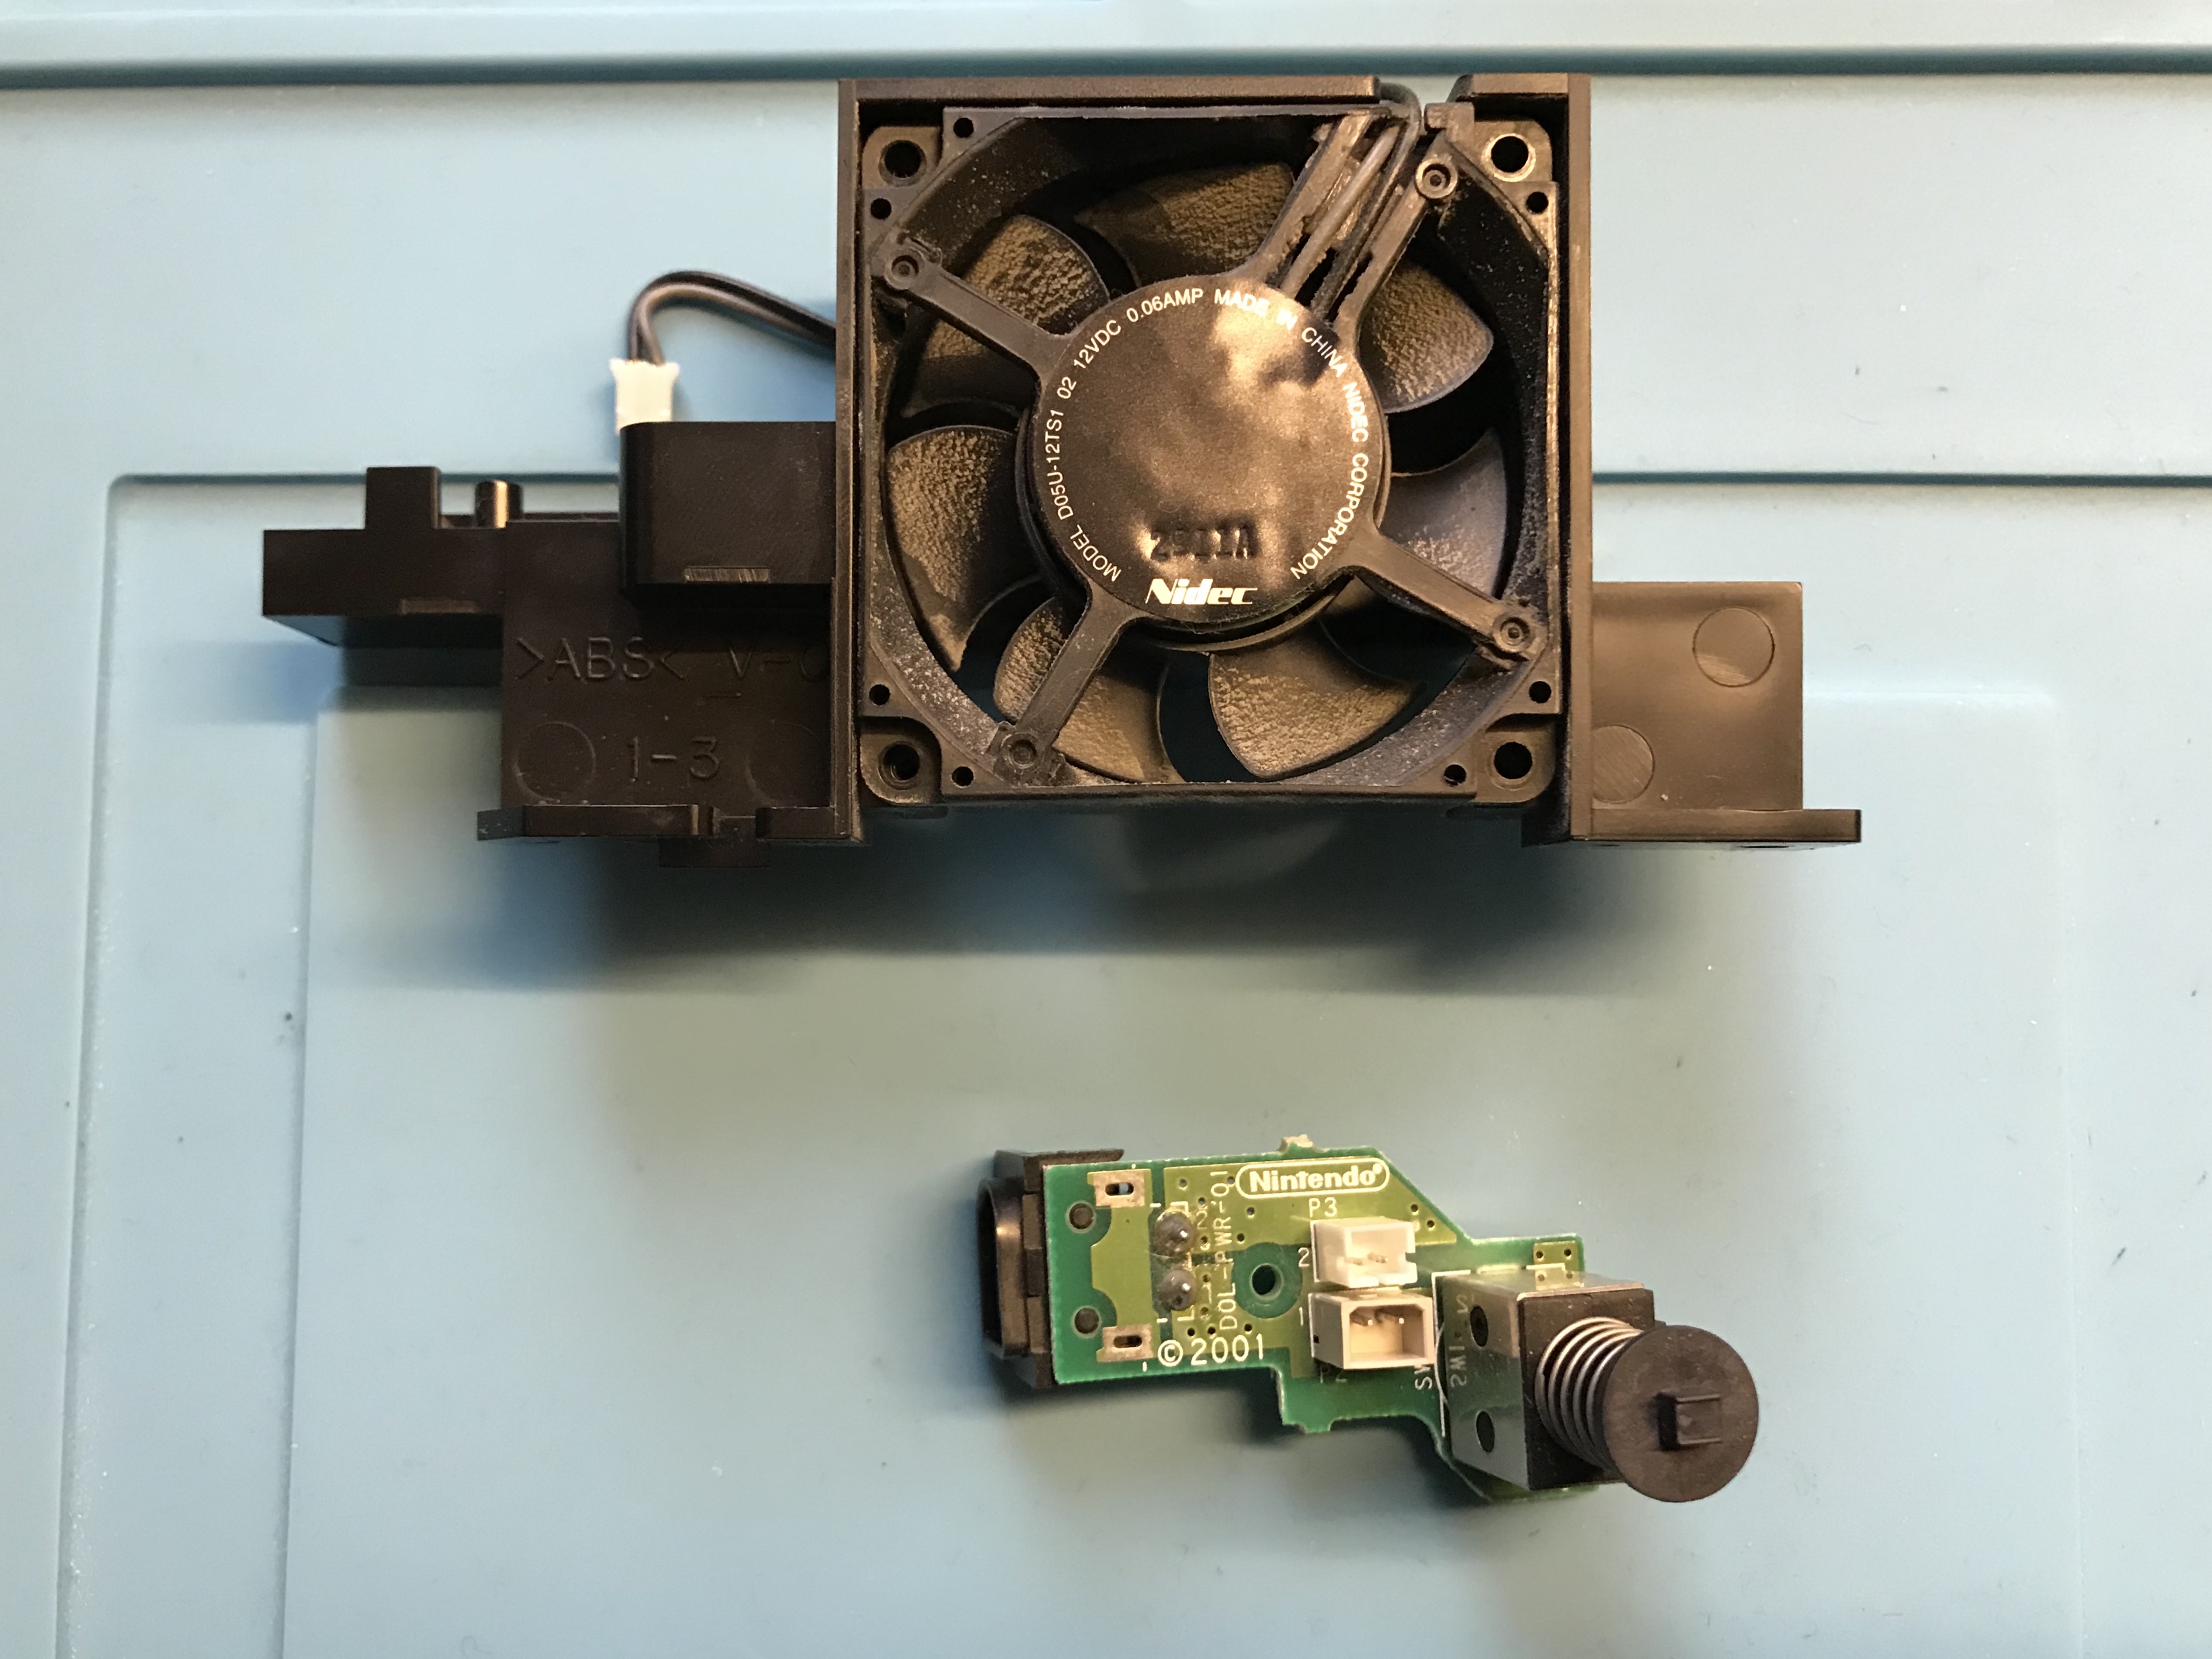 Power input and switch board removed from original gamecube fan assembly